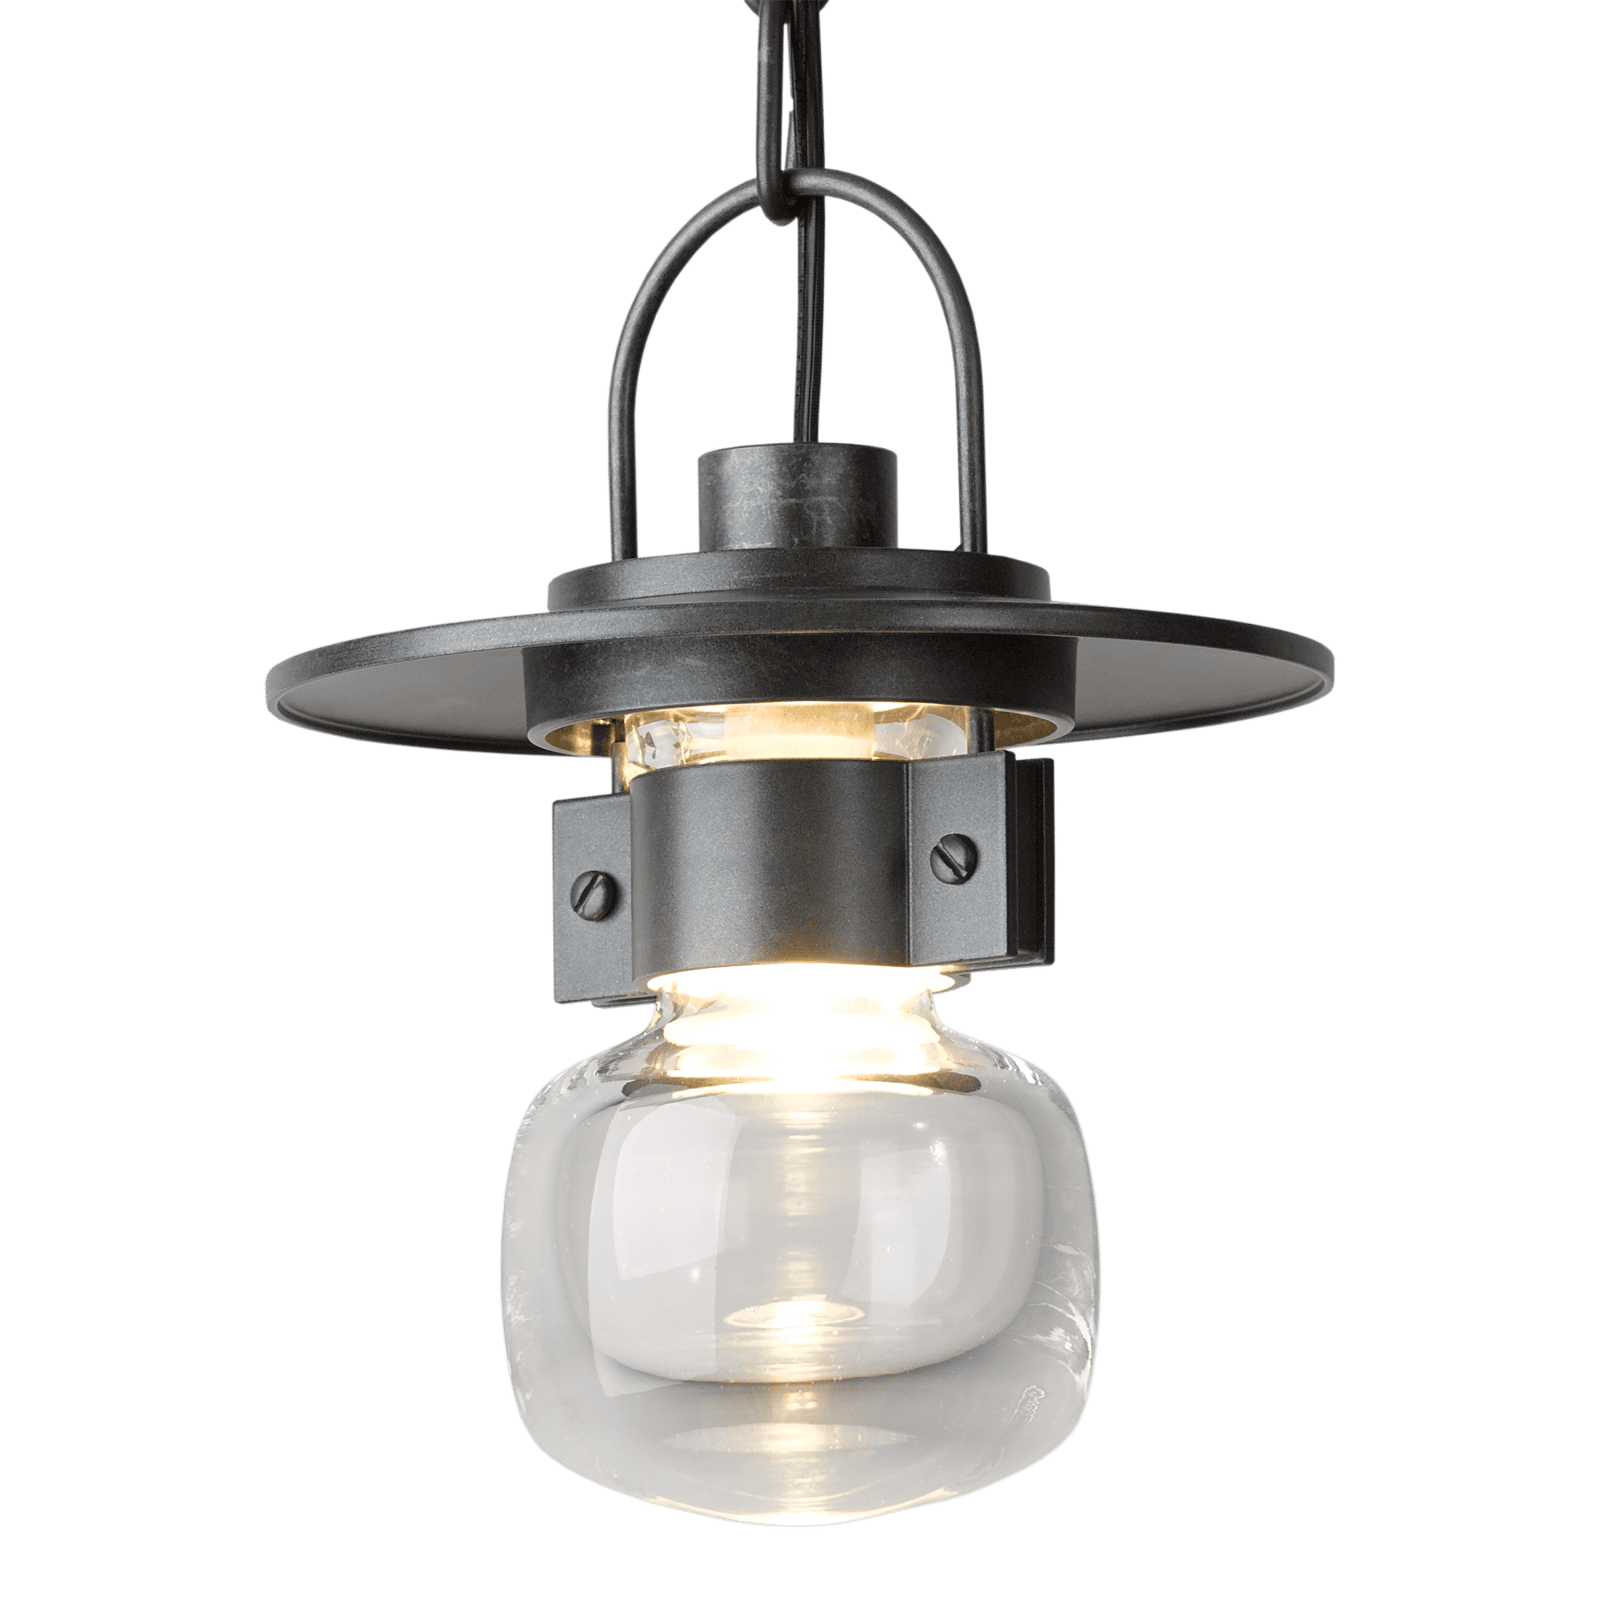 Hubbardton Forge Mason Small Outdoor Ceiling Fixture Outdoor l Wall Hubbardton Forge Coastal Burnished Steel Clear Glass (ZM) 